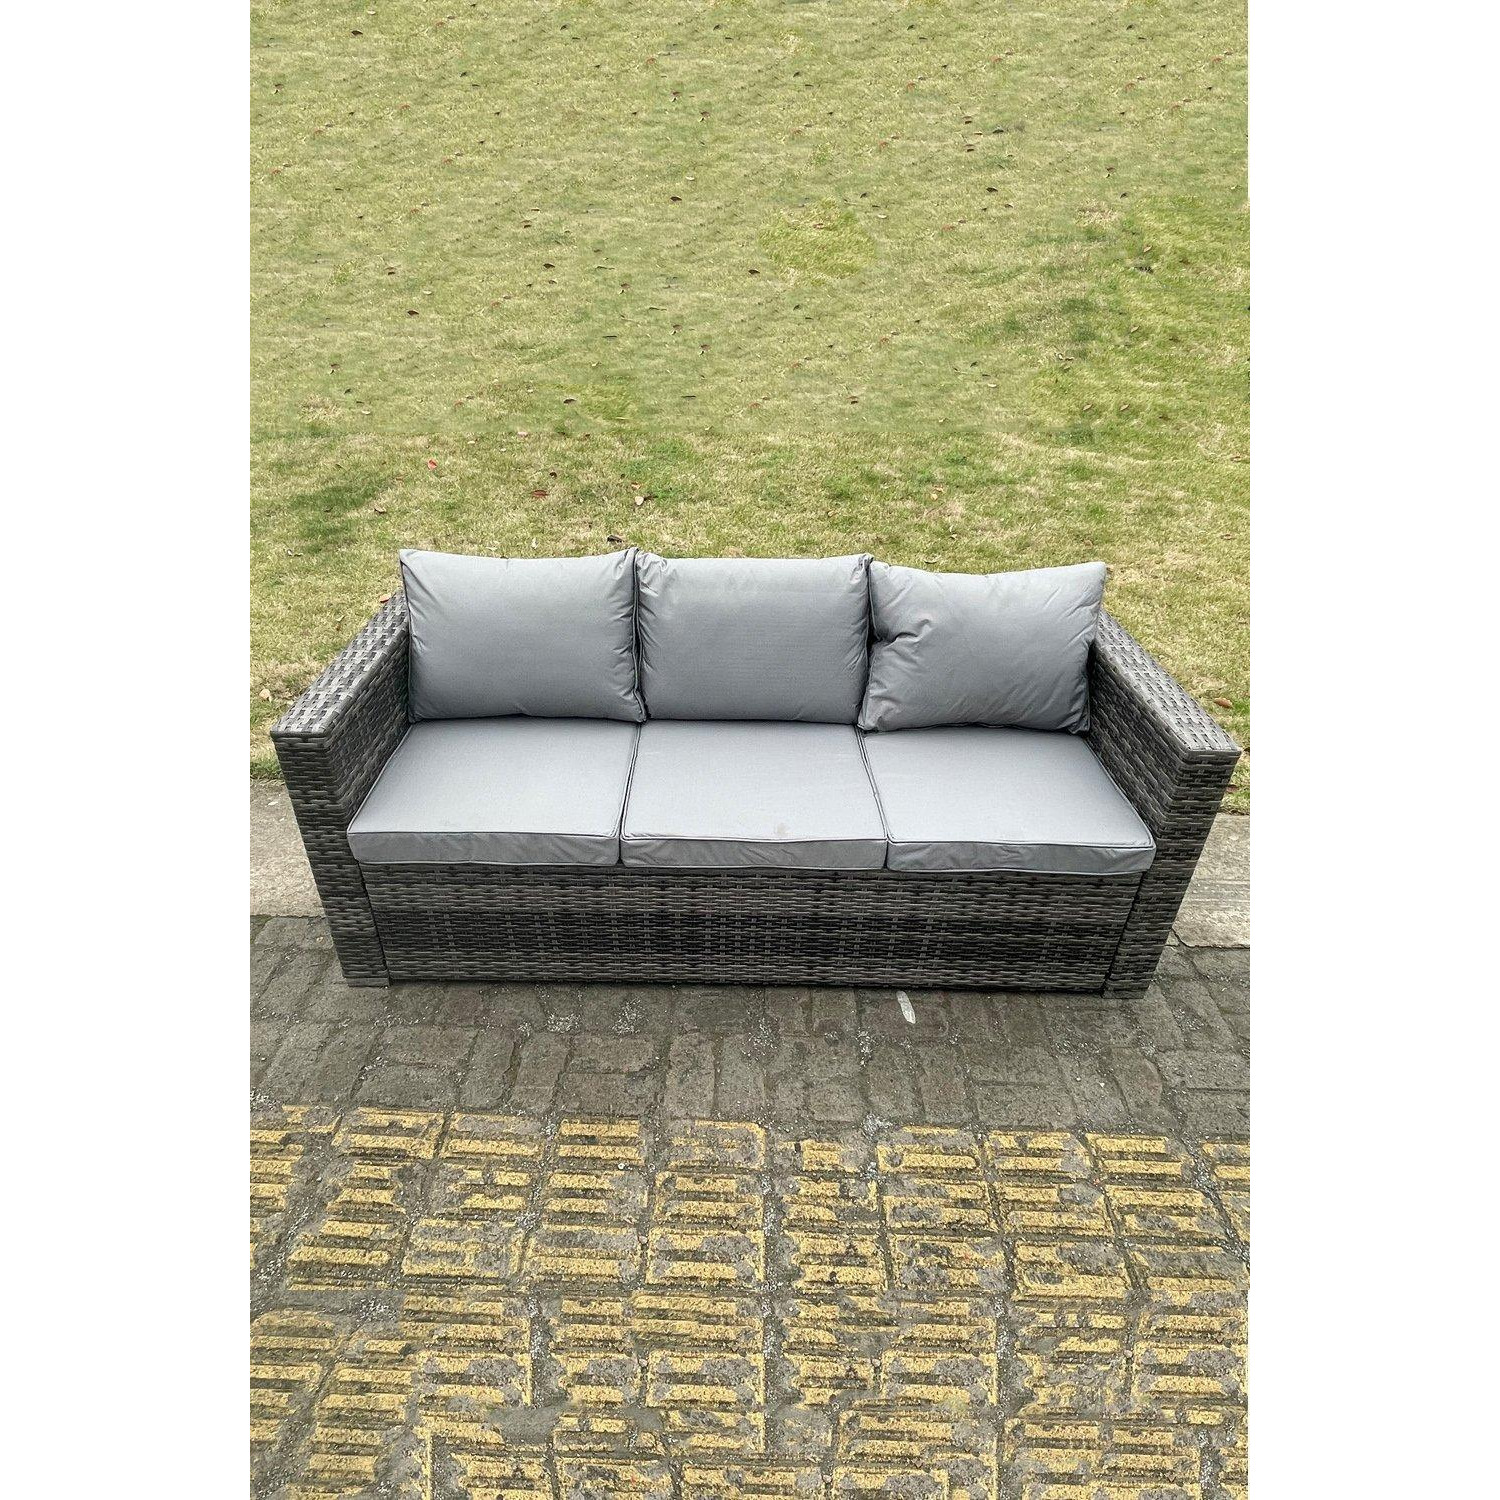 3 Seater Rattan Lounge Sofa Patio Outdoor Garden Furniture With Seat And Back Cushion - image 1